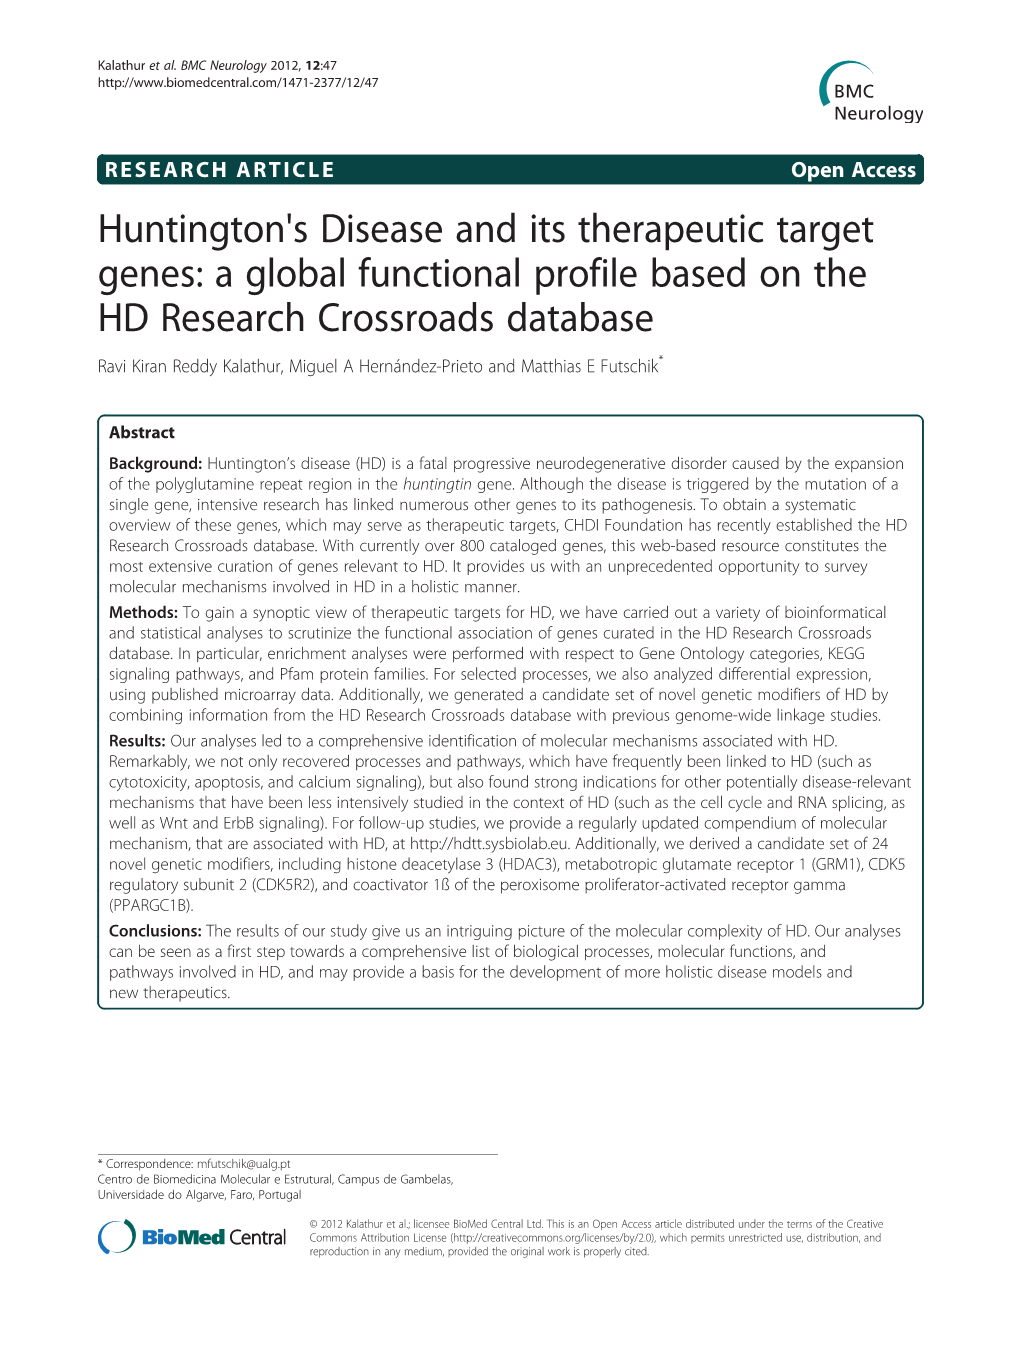 Huntington's Disease and Its Therapeutic Target Genes